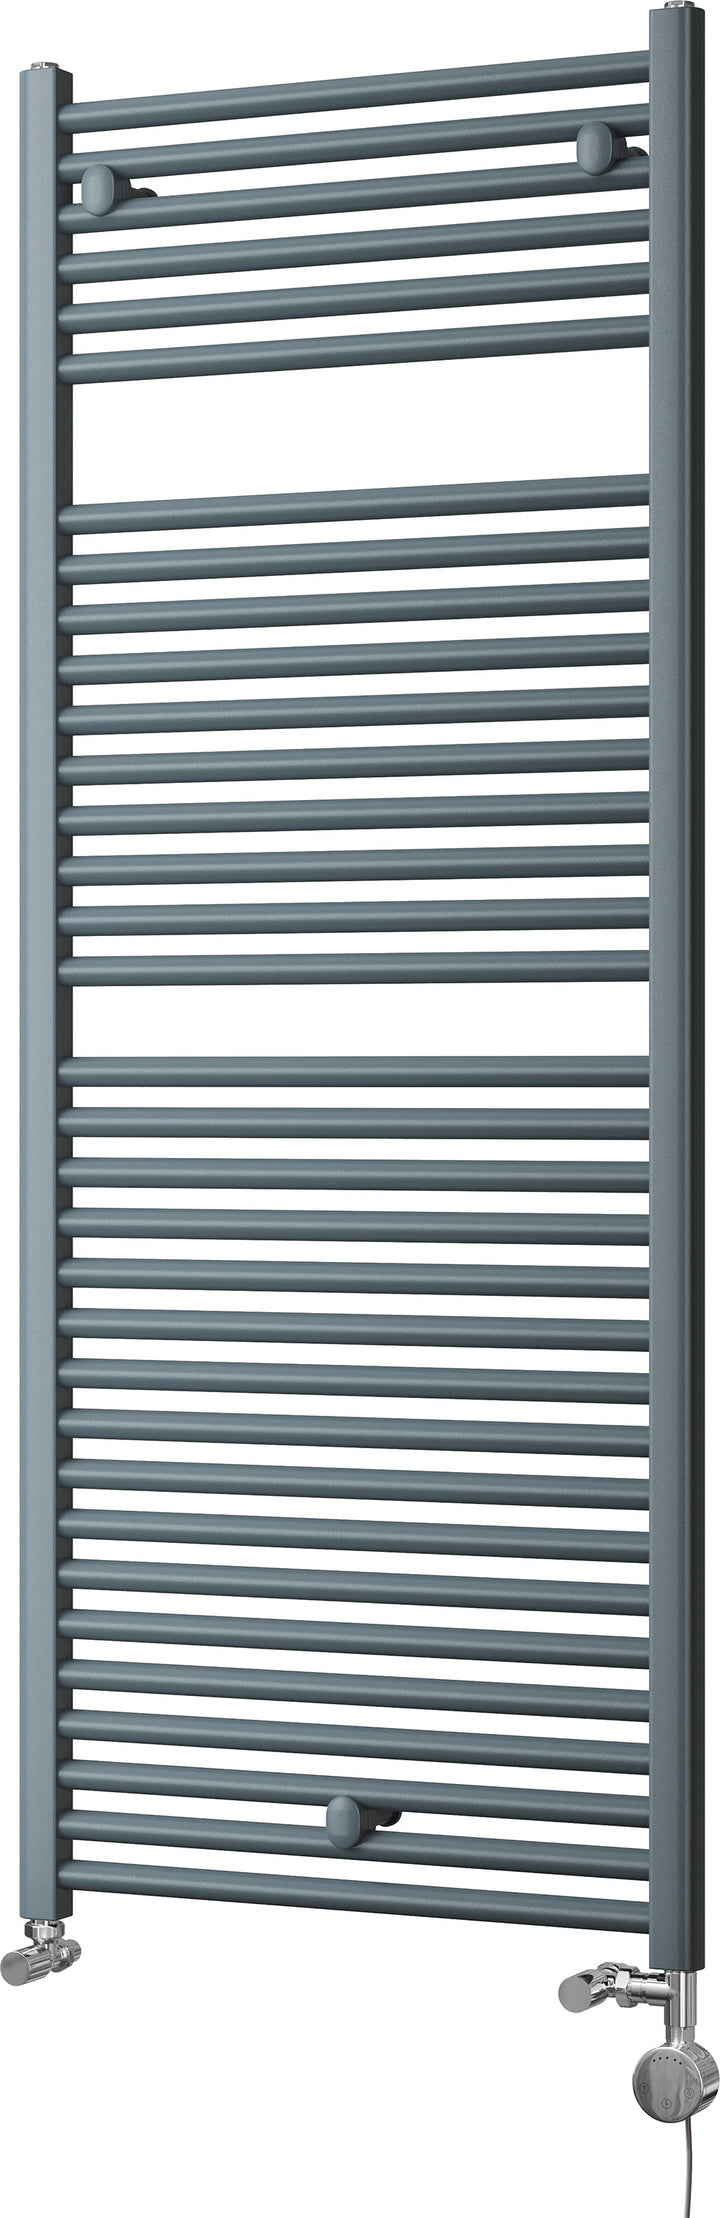 Roma - Anthracite Dual Fuel Towel Rail H1512mm x W600mm Thermostatic - Straight